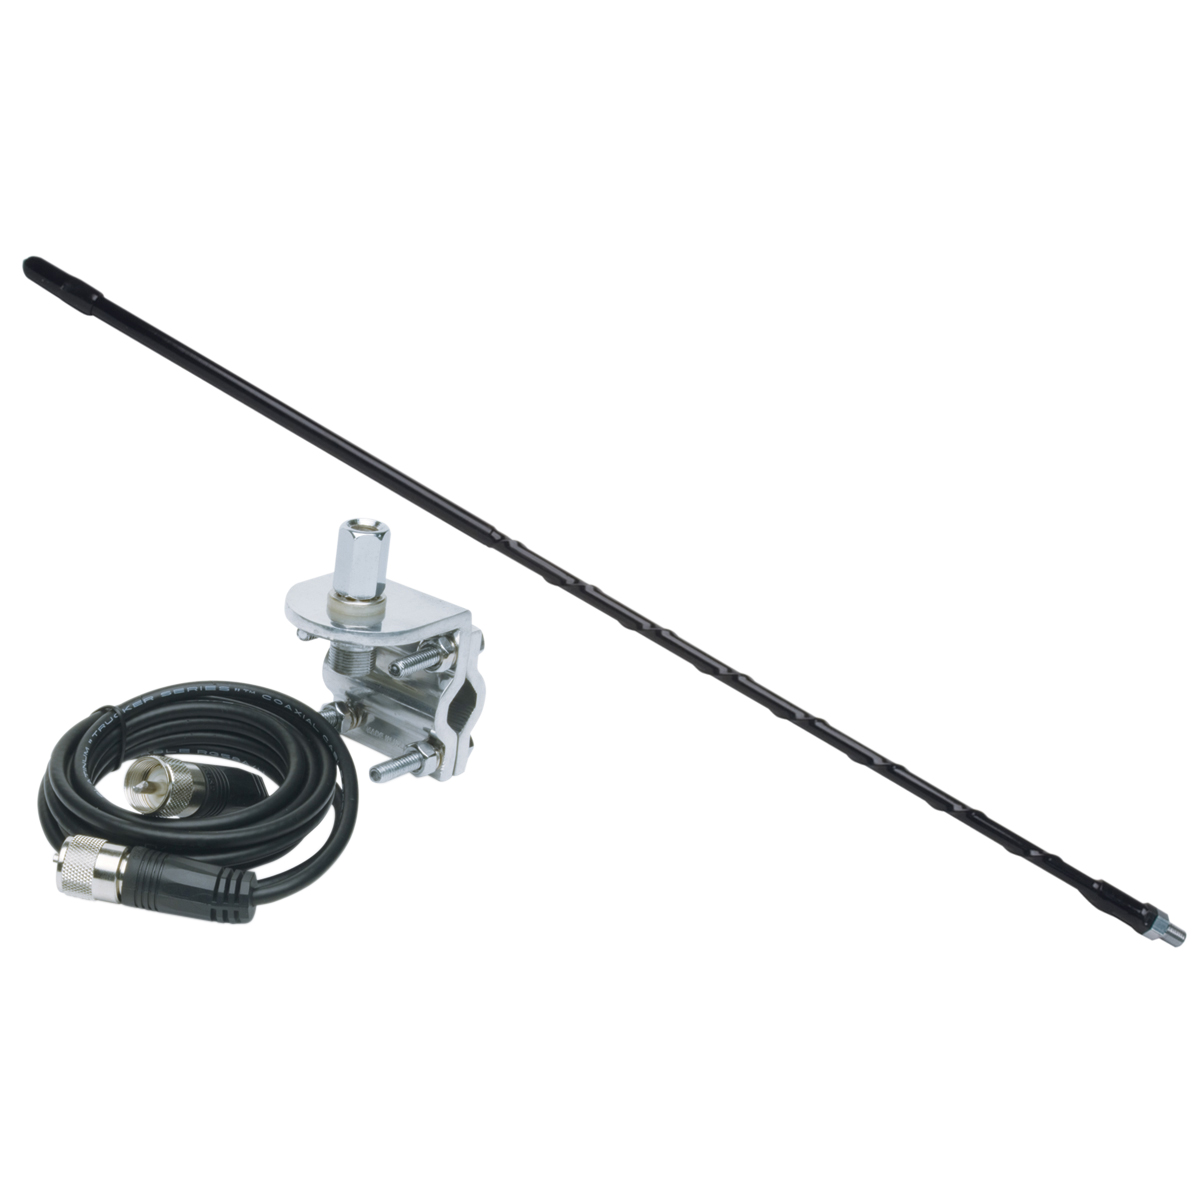 4ft Fiberglass Antenna w Mount and Cable